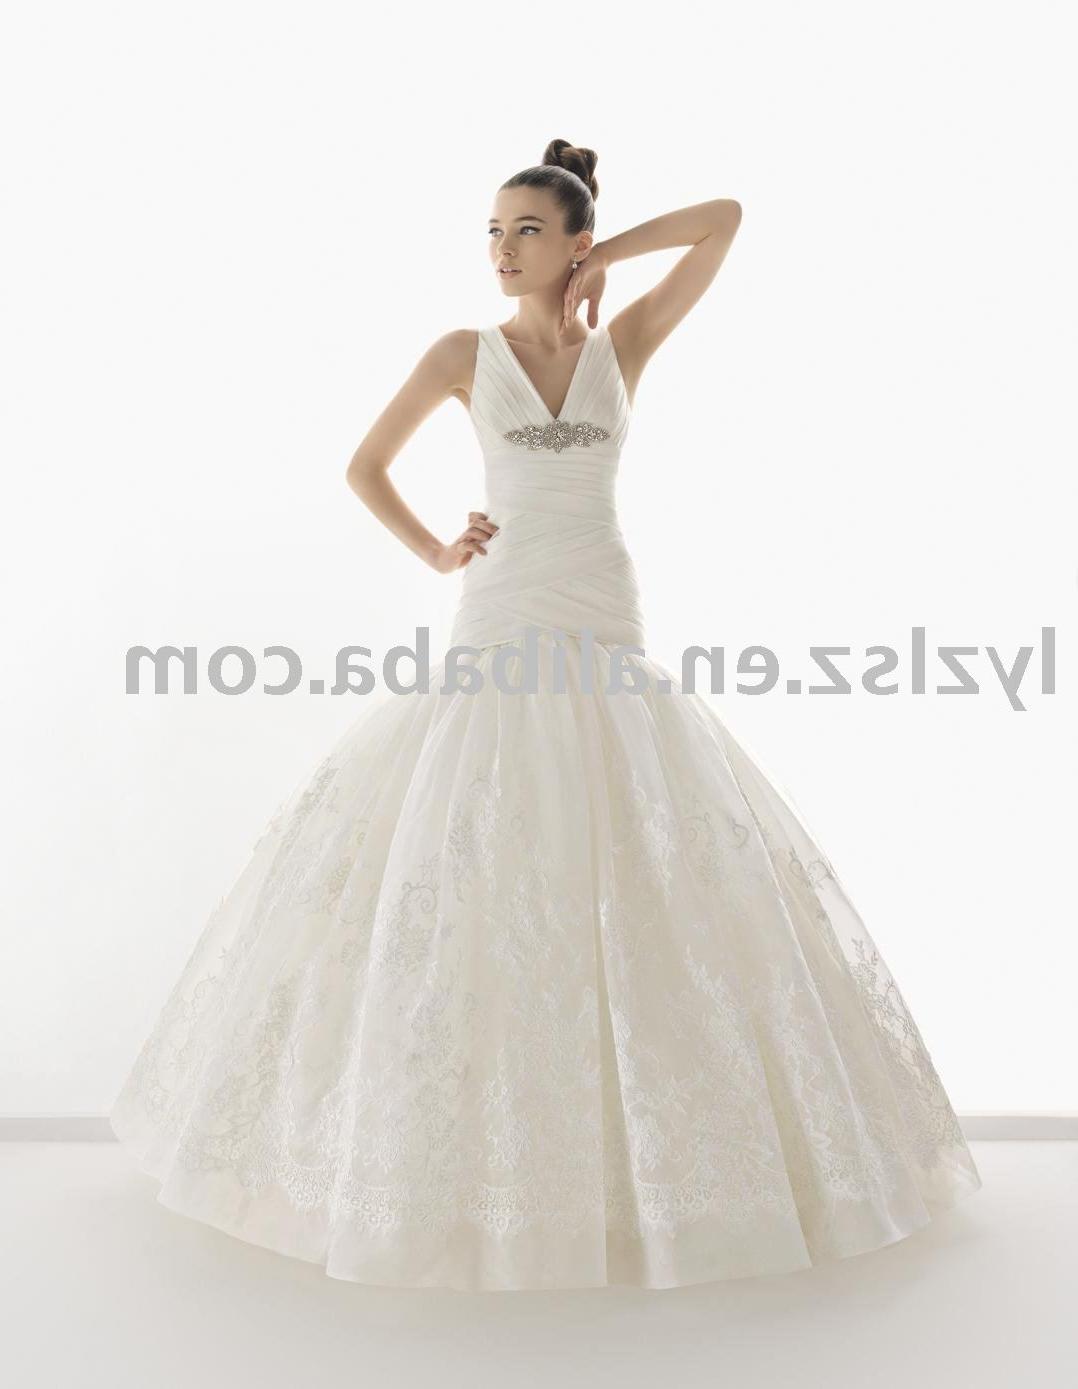 See larger image: 2011 NEW STYLE HY2337 gorgeous V-neck lace wedding dress